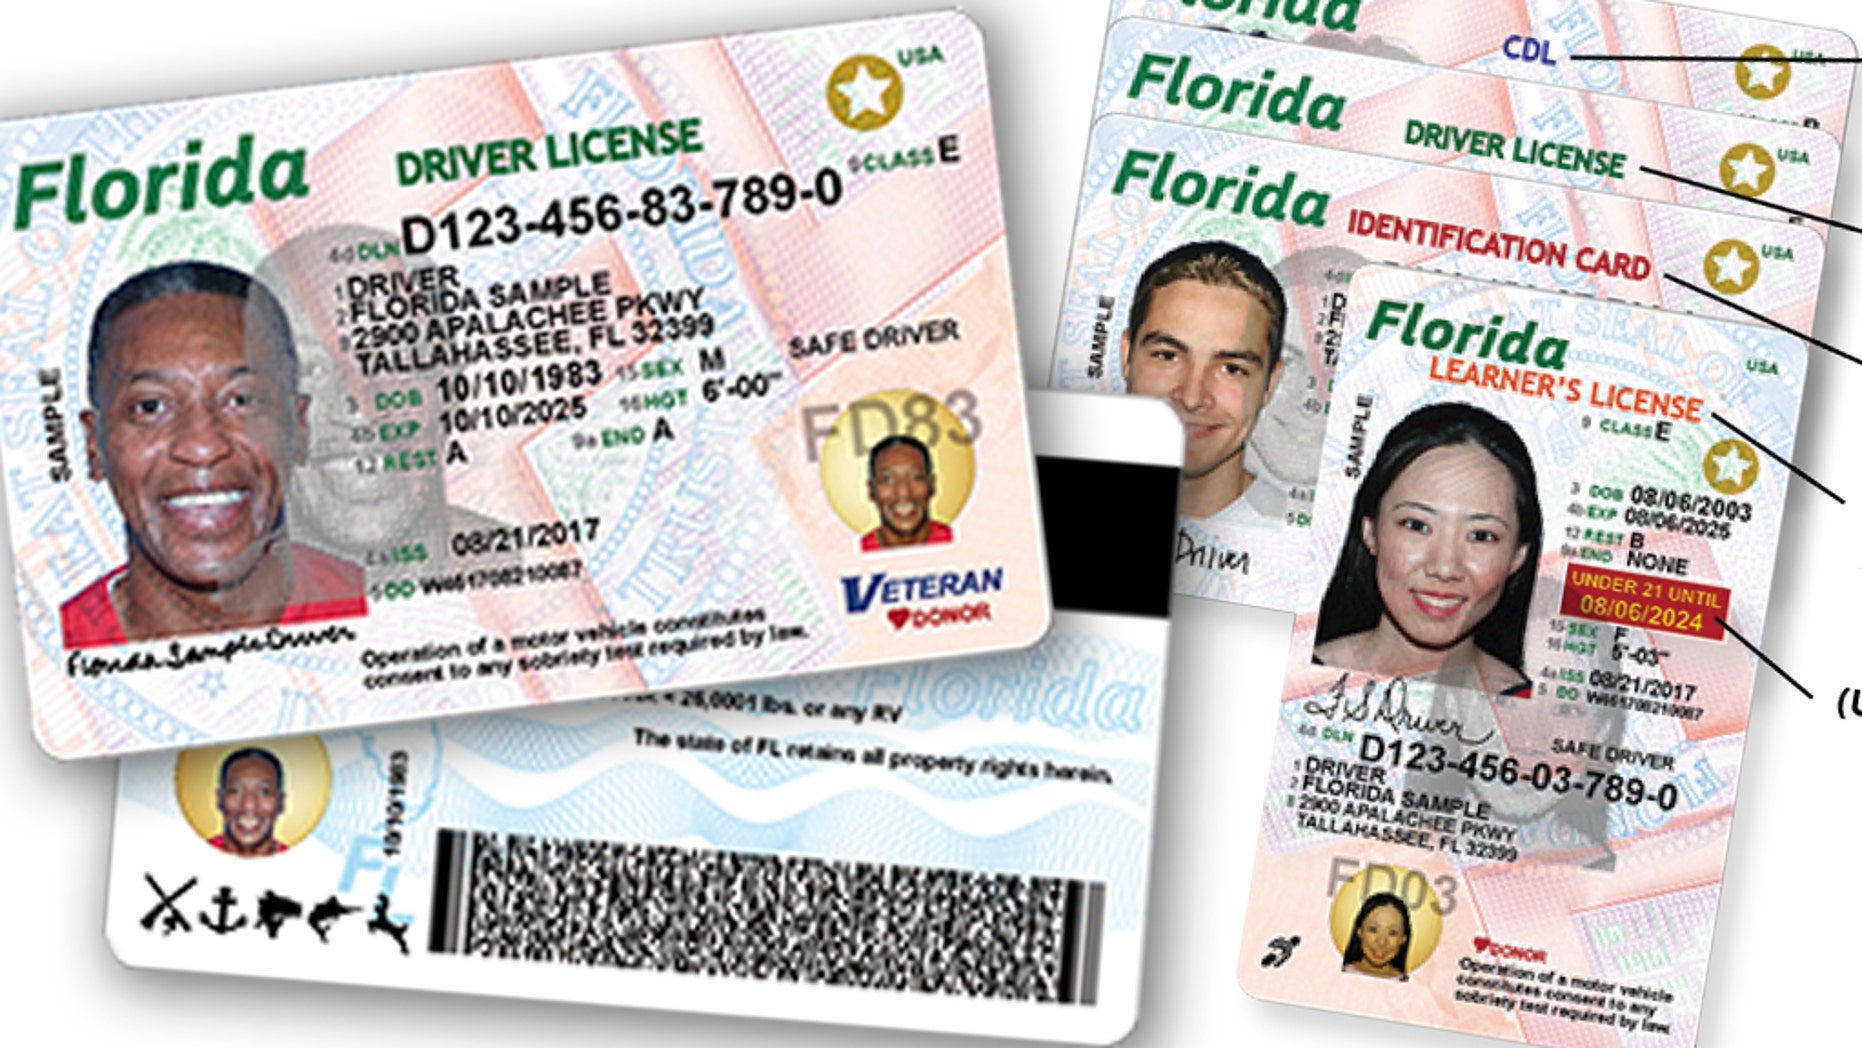 A bill recently introduced in the House of Representatives and the Florida Senate would allow people to obtain a driver's license regardless of their immigration status in the United States.